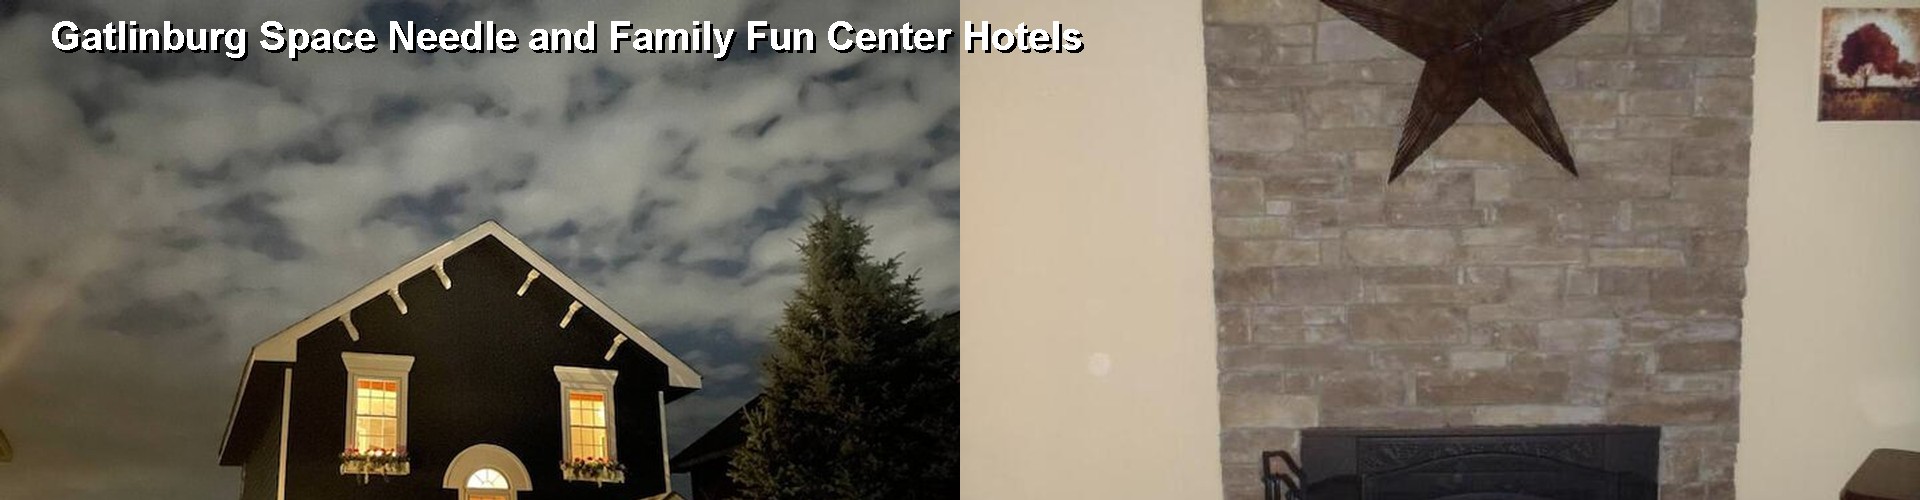 5 Best Hotels near Gatlinburg Space Needle and Family Fun Center